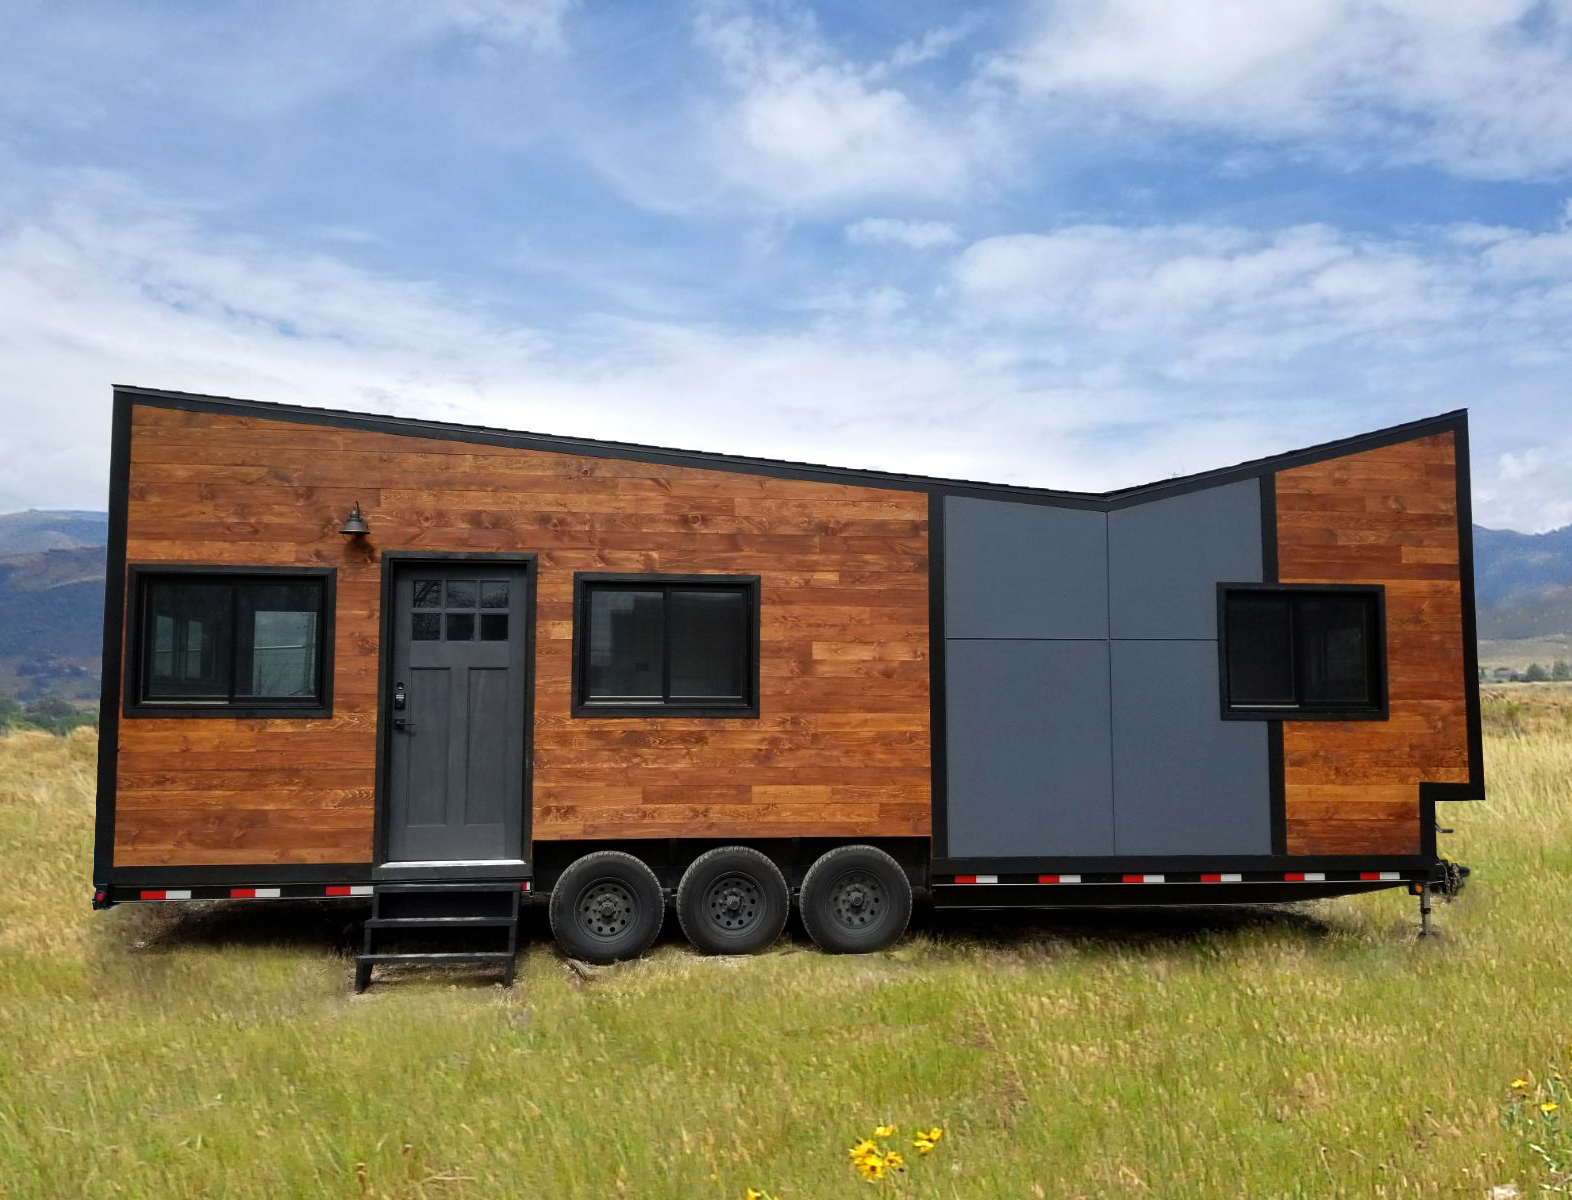 Where Can I Put My Tiny House A Near Comprehensive List Of Tiny House Parking Resources Tiny House Builders B B Micro Manufacturing,Light Chocolate Brown Hair Color Dye